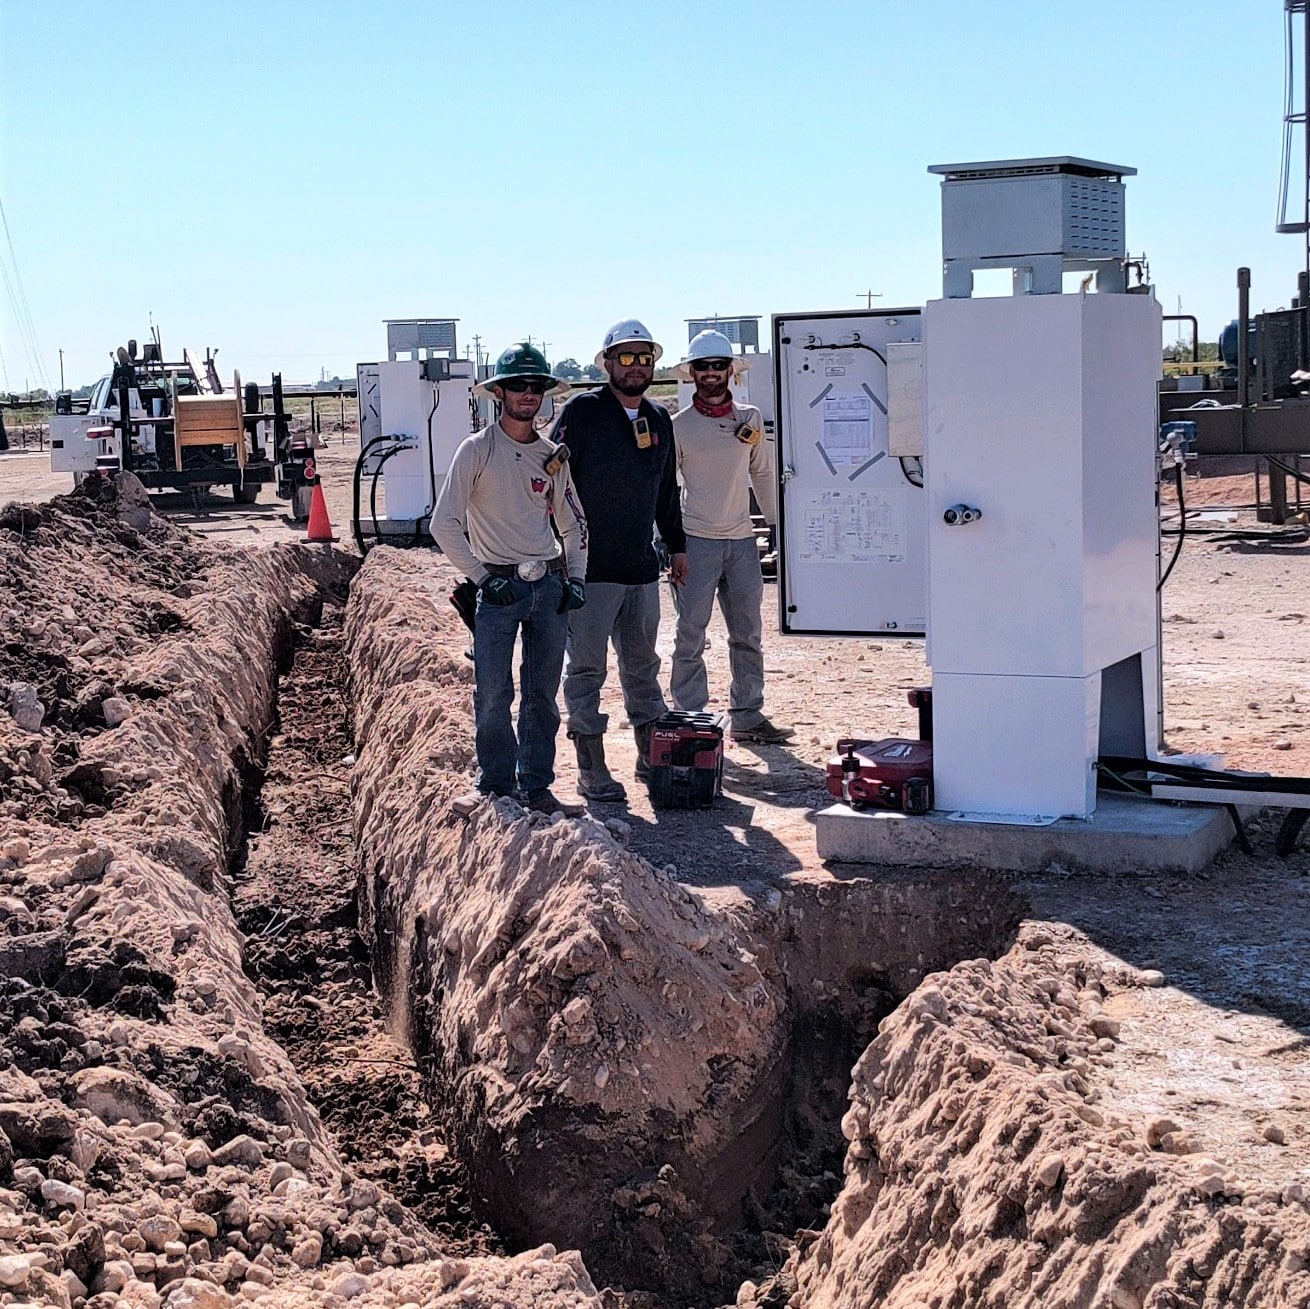 Men standing by electrical box next to wire pull.